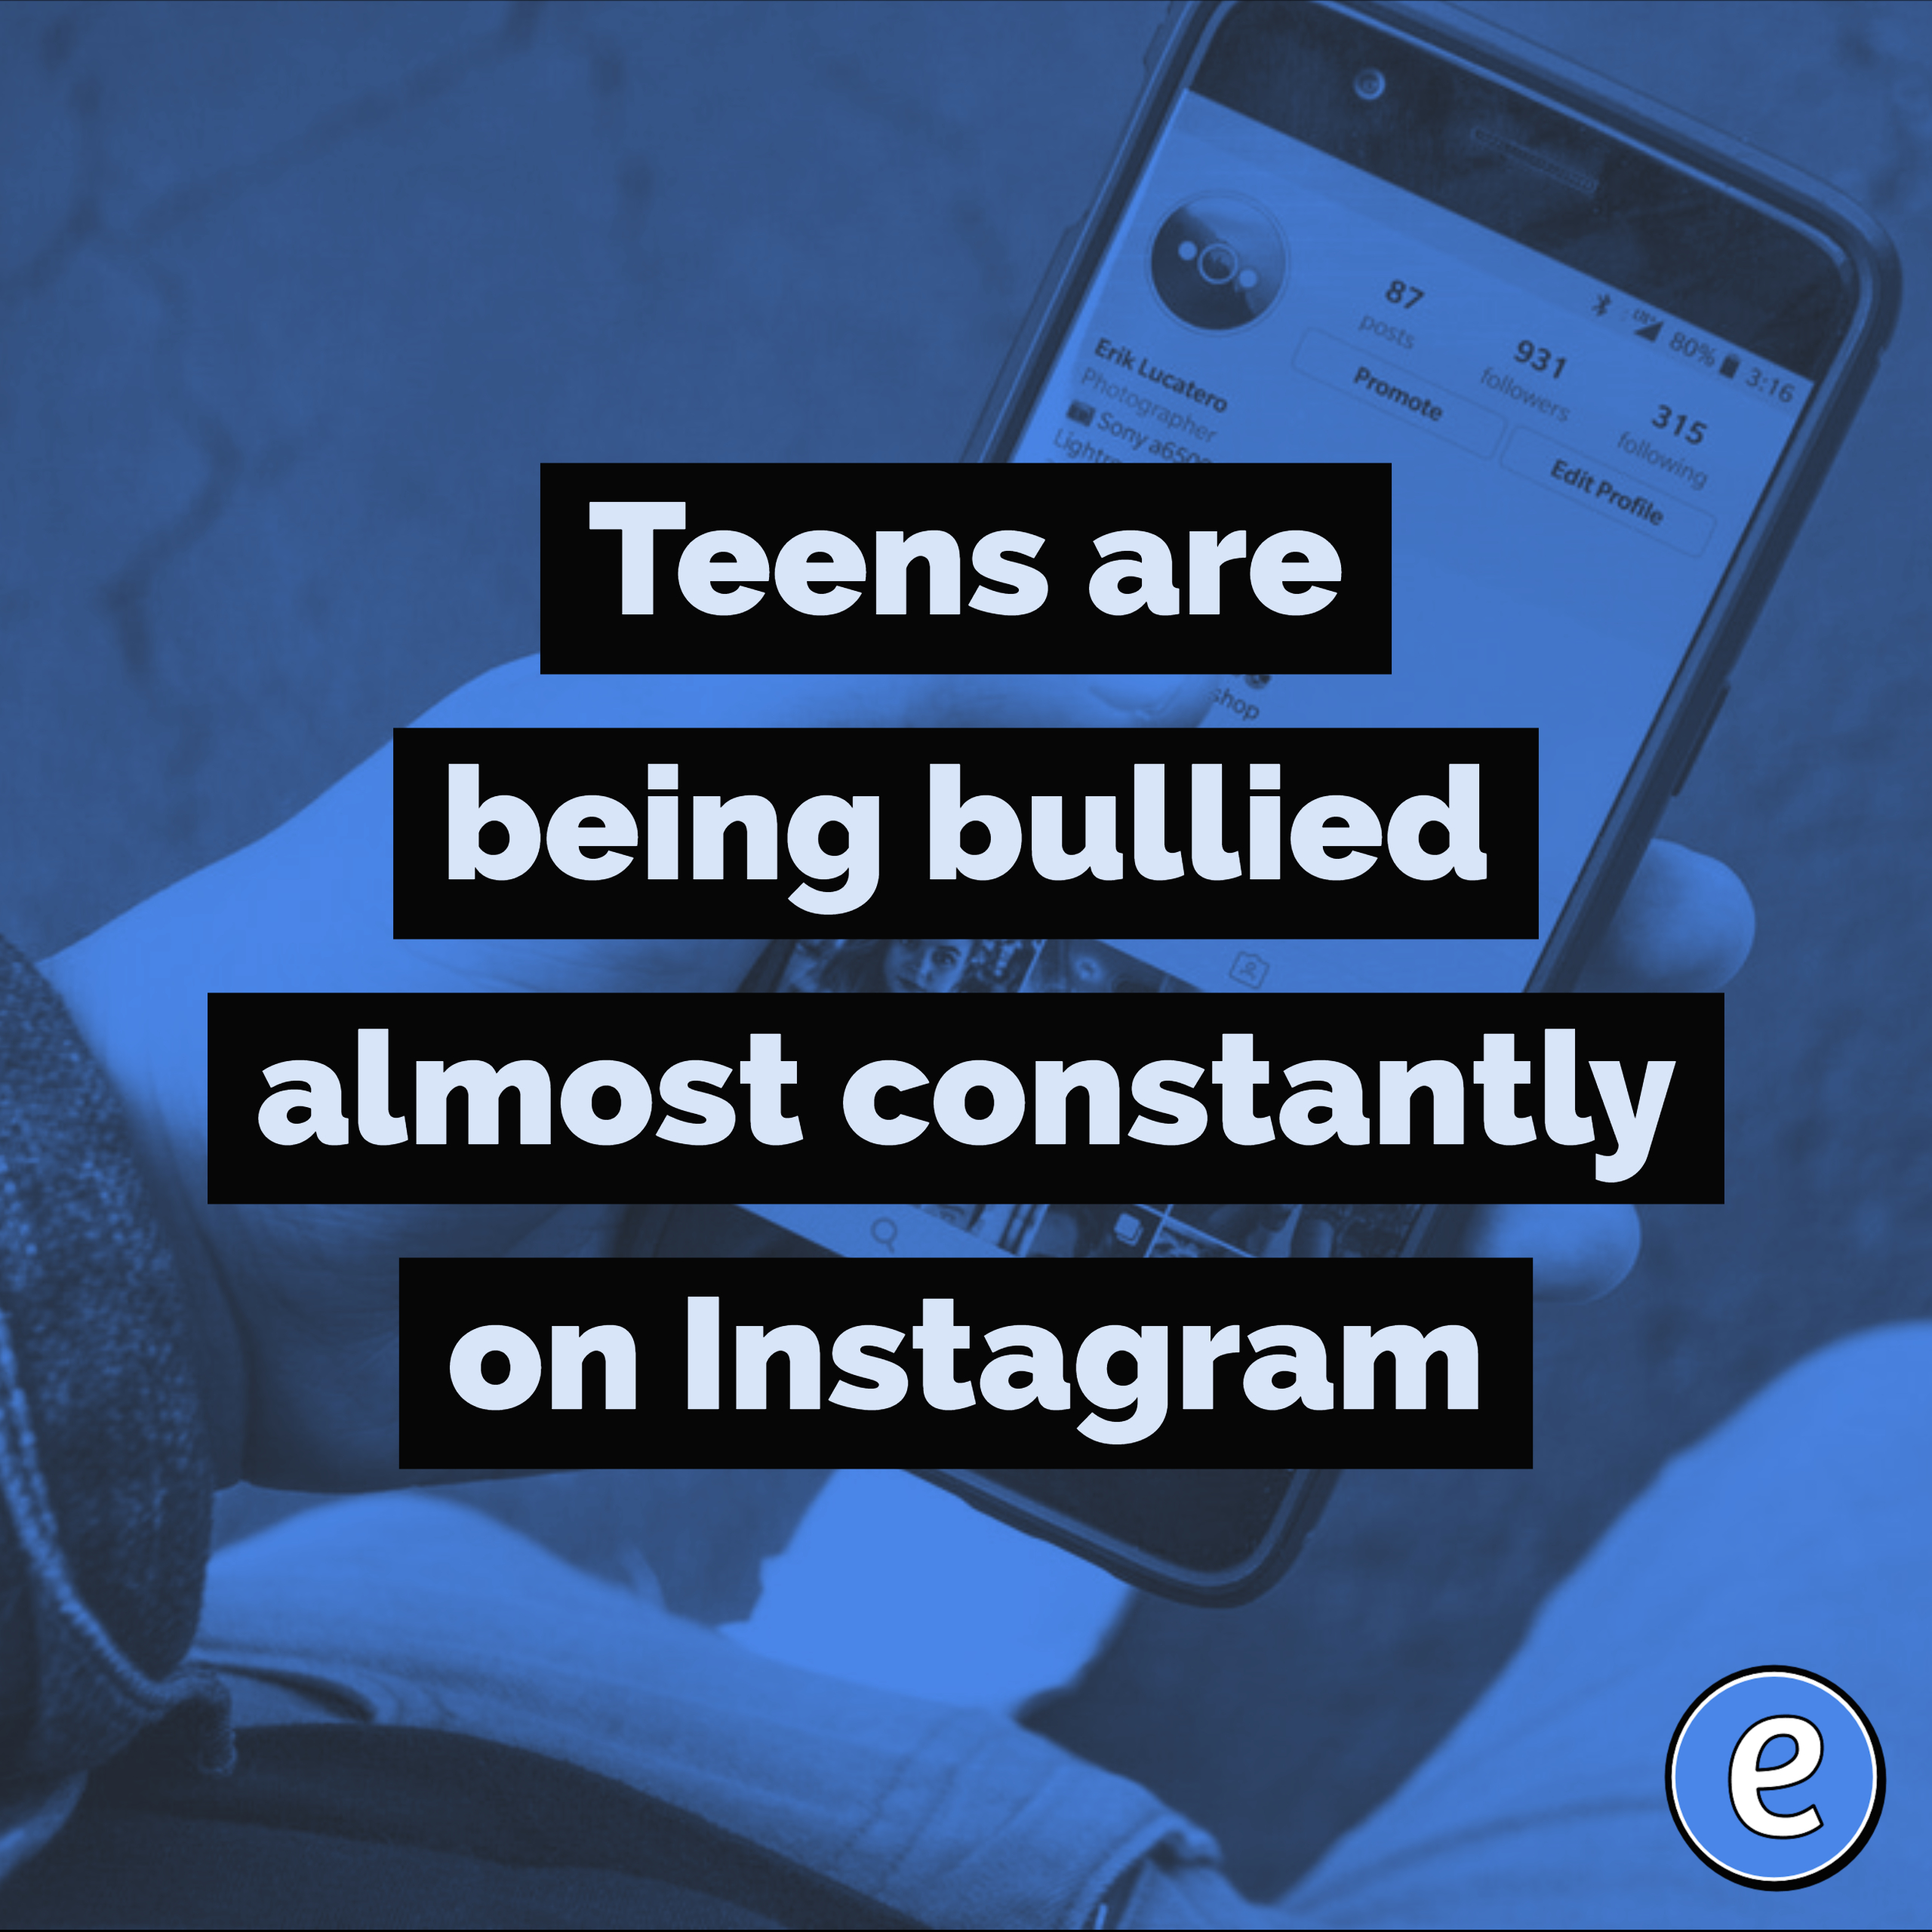 Teens are being bullied almost constantly on Instagram